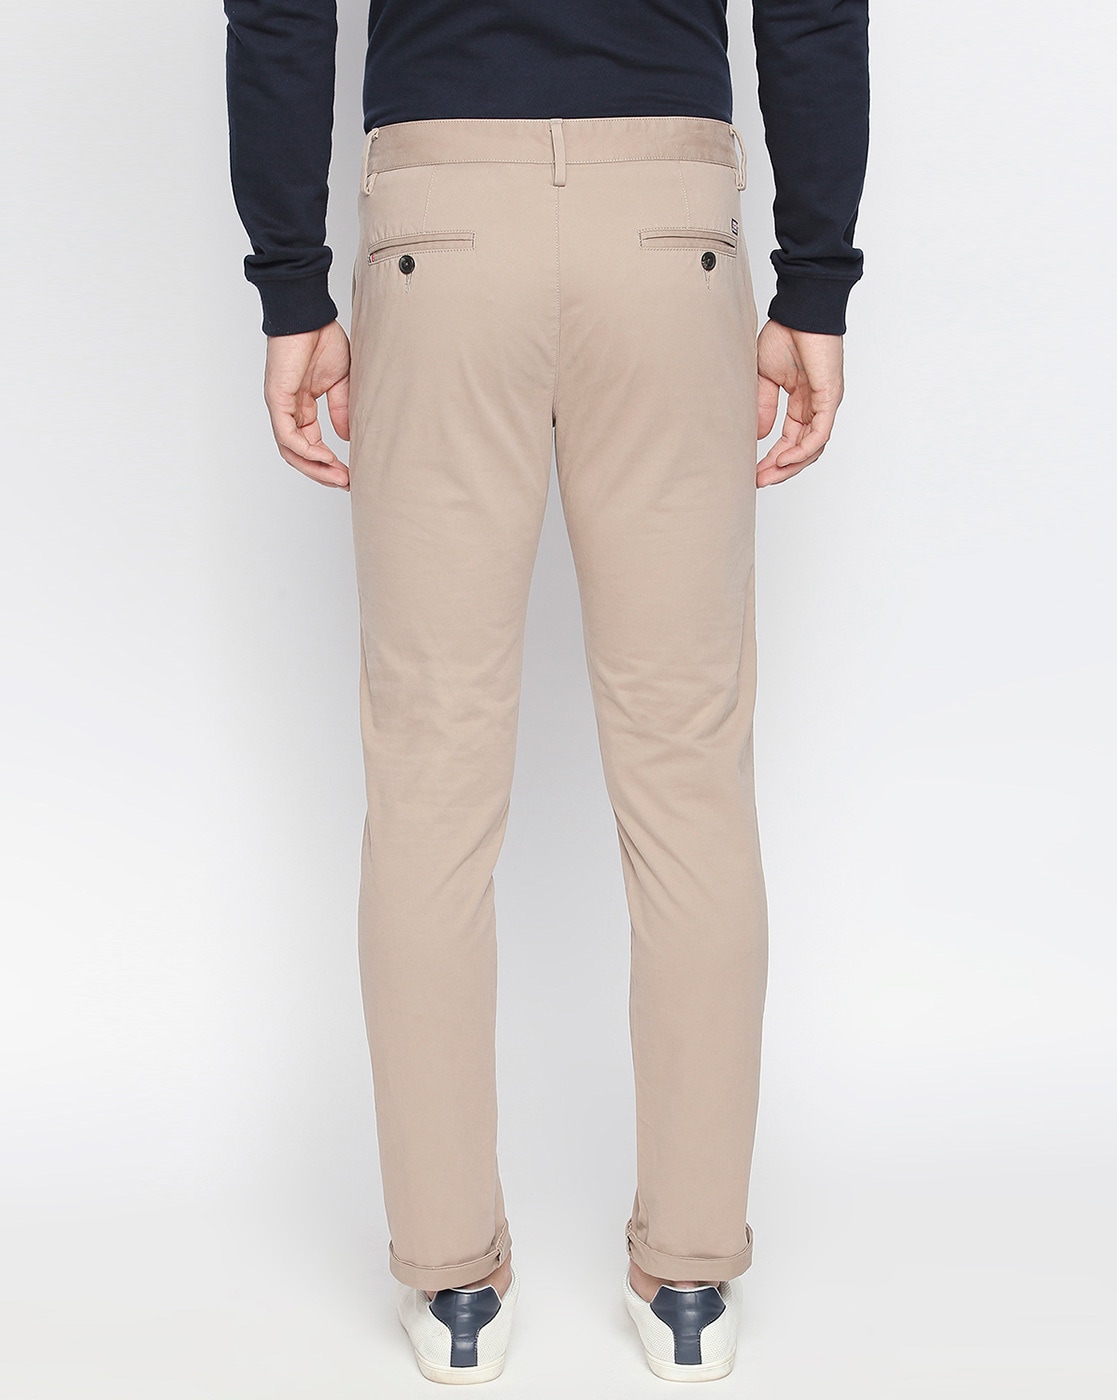 Buy DARK GREY Trousers & Pants for Men by Byford by Pantaloons Online |  Ajio.com